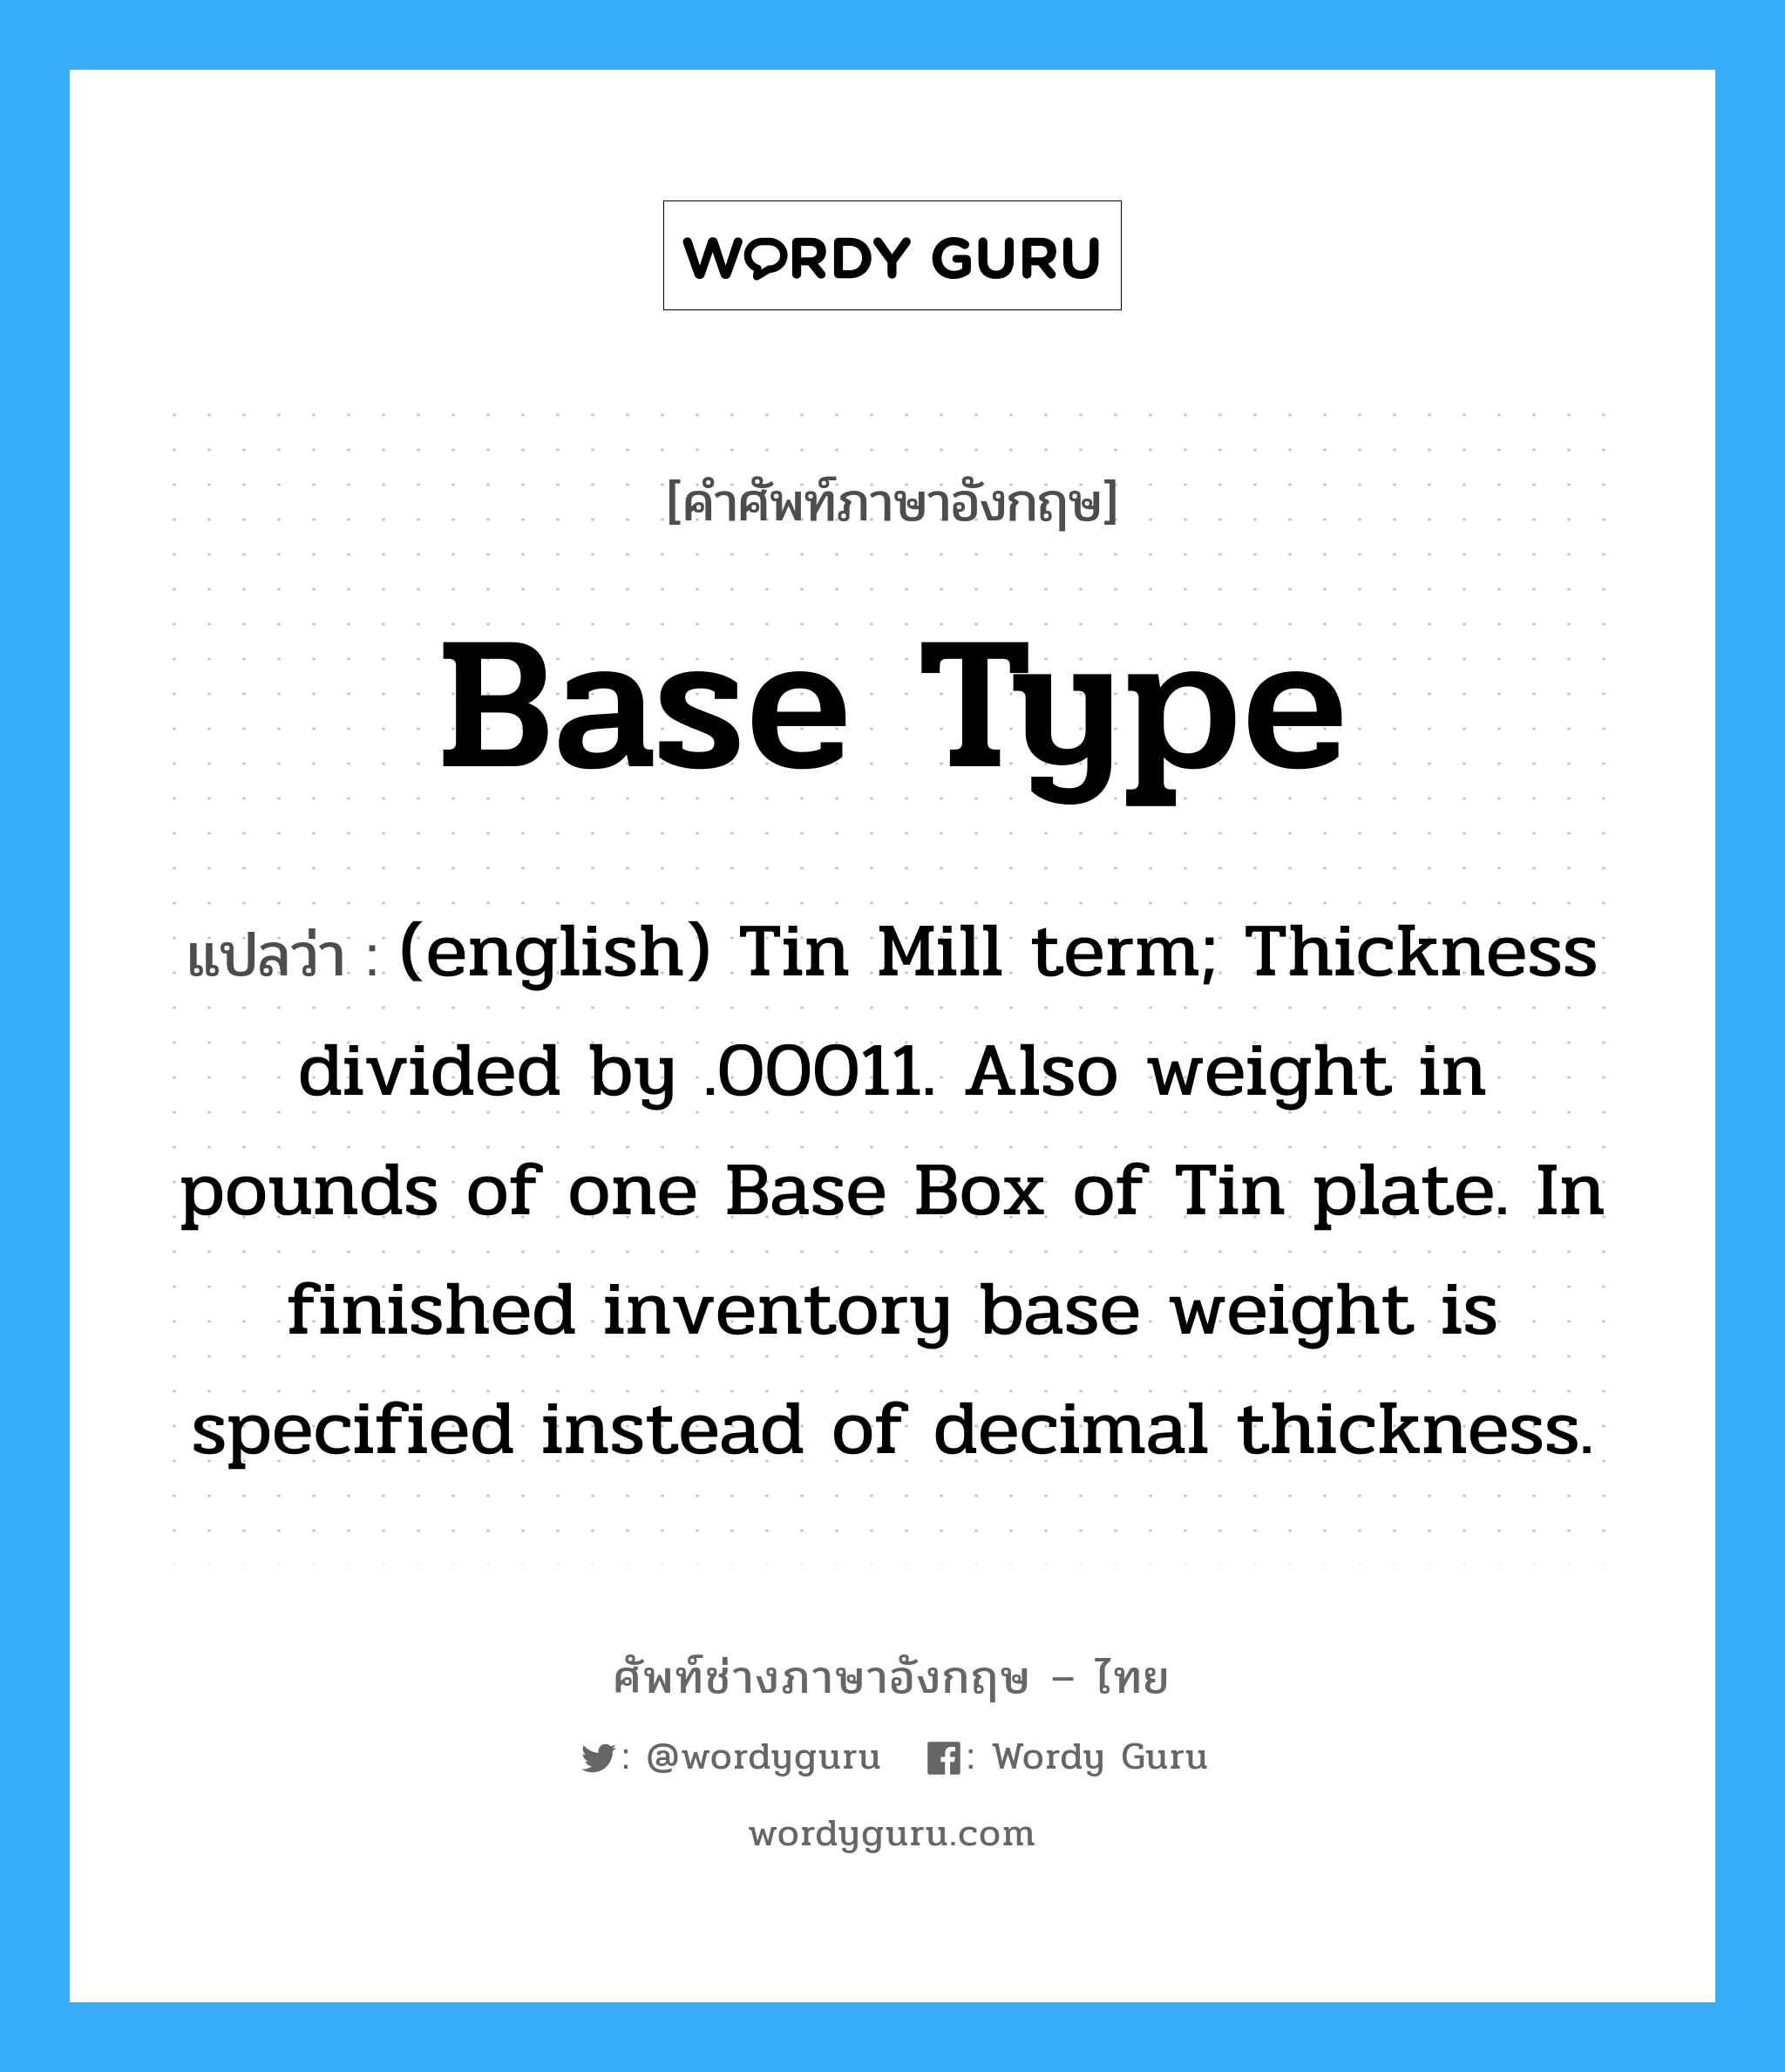 Base Type แปลว่า?, คำศัพท์ช่างภาษาอังกฤษ - ไทย Base Type คำศัพท์ภาษาอังกฤษ Base Type แปลว่า (english) Tin Mill term; Thickness divided by .00011. Also weight in pounds of one Base Box of Tin plate. In finished inventory base weight is specified instead of decimal thickness.